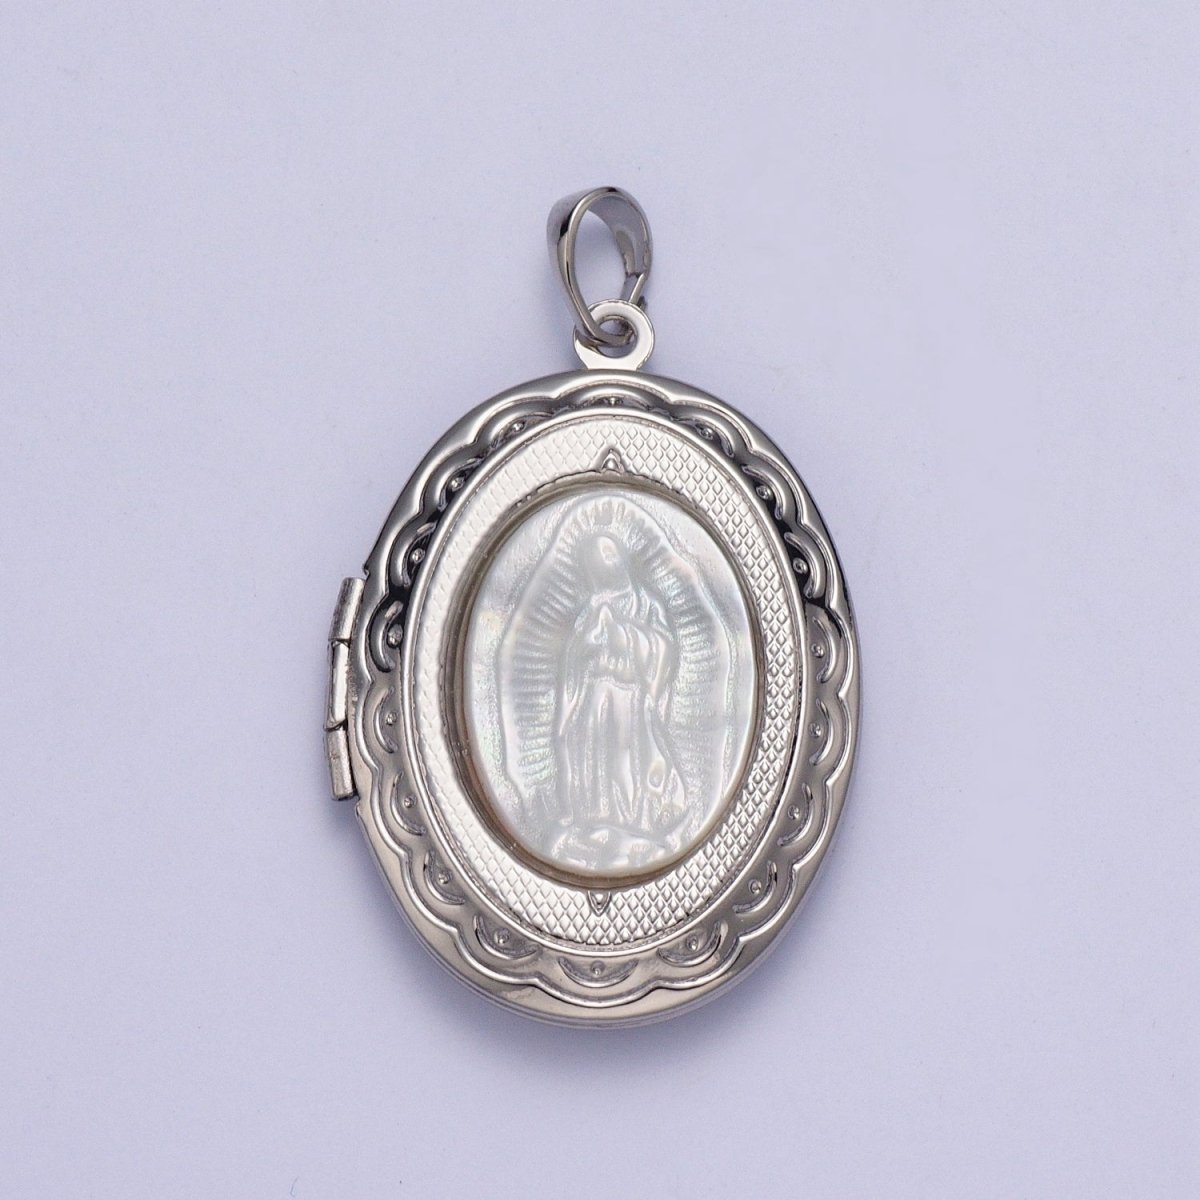 Lady of Guadalupe Detailed Double Sided Locket Pendant Open Locket Pearl Necklace Bracelet Supply | X-469 X-470 X-471 - DLUXCA